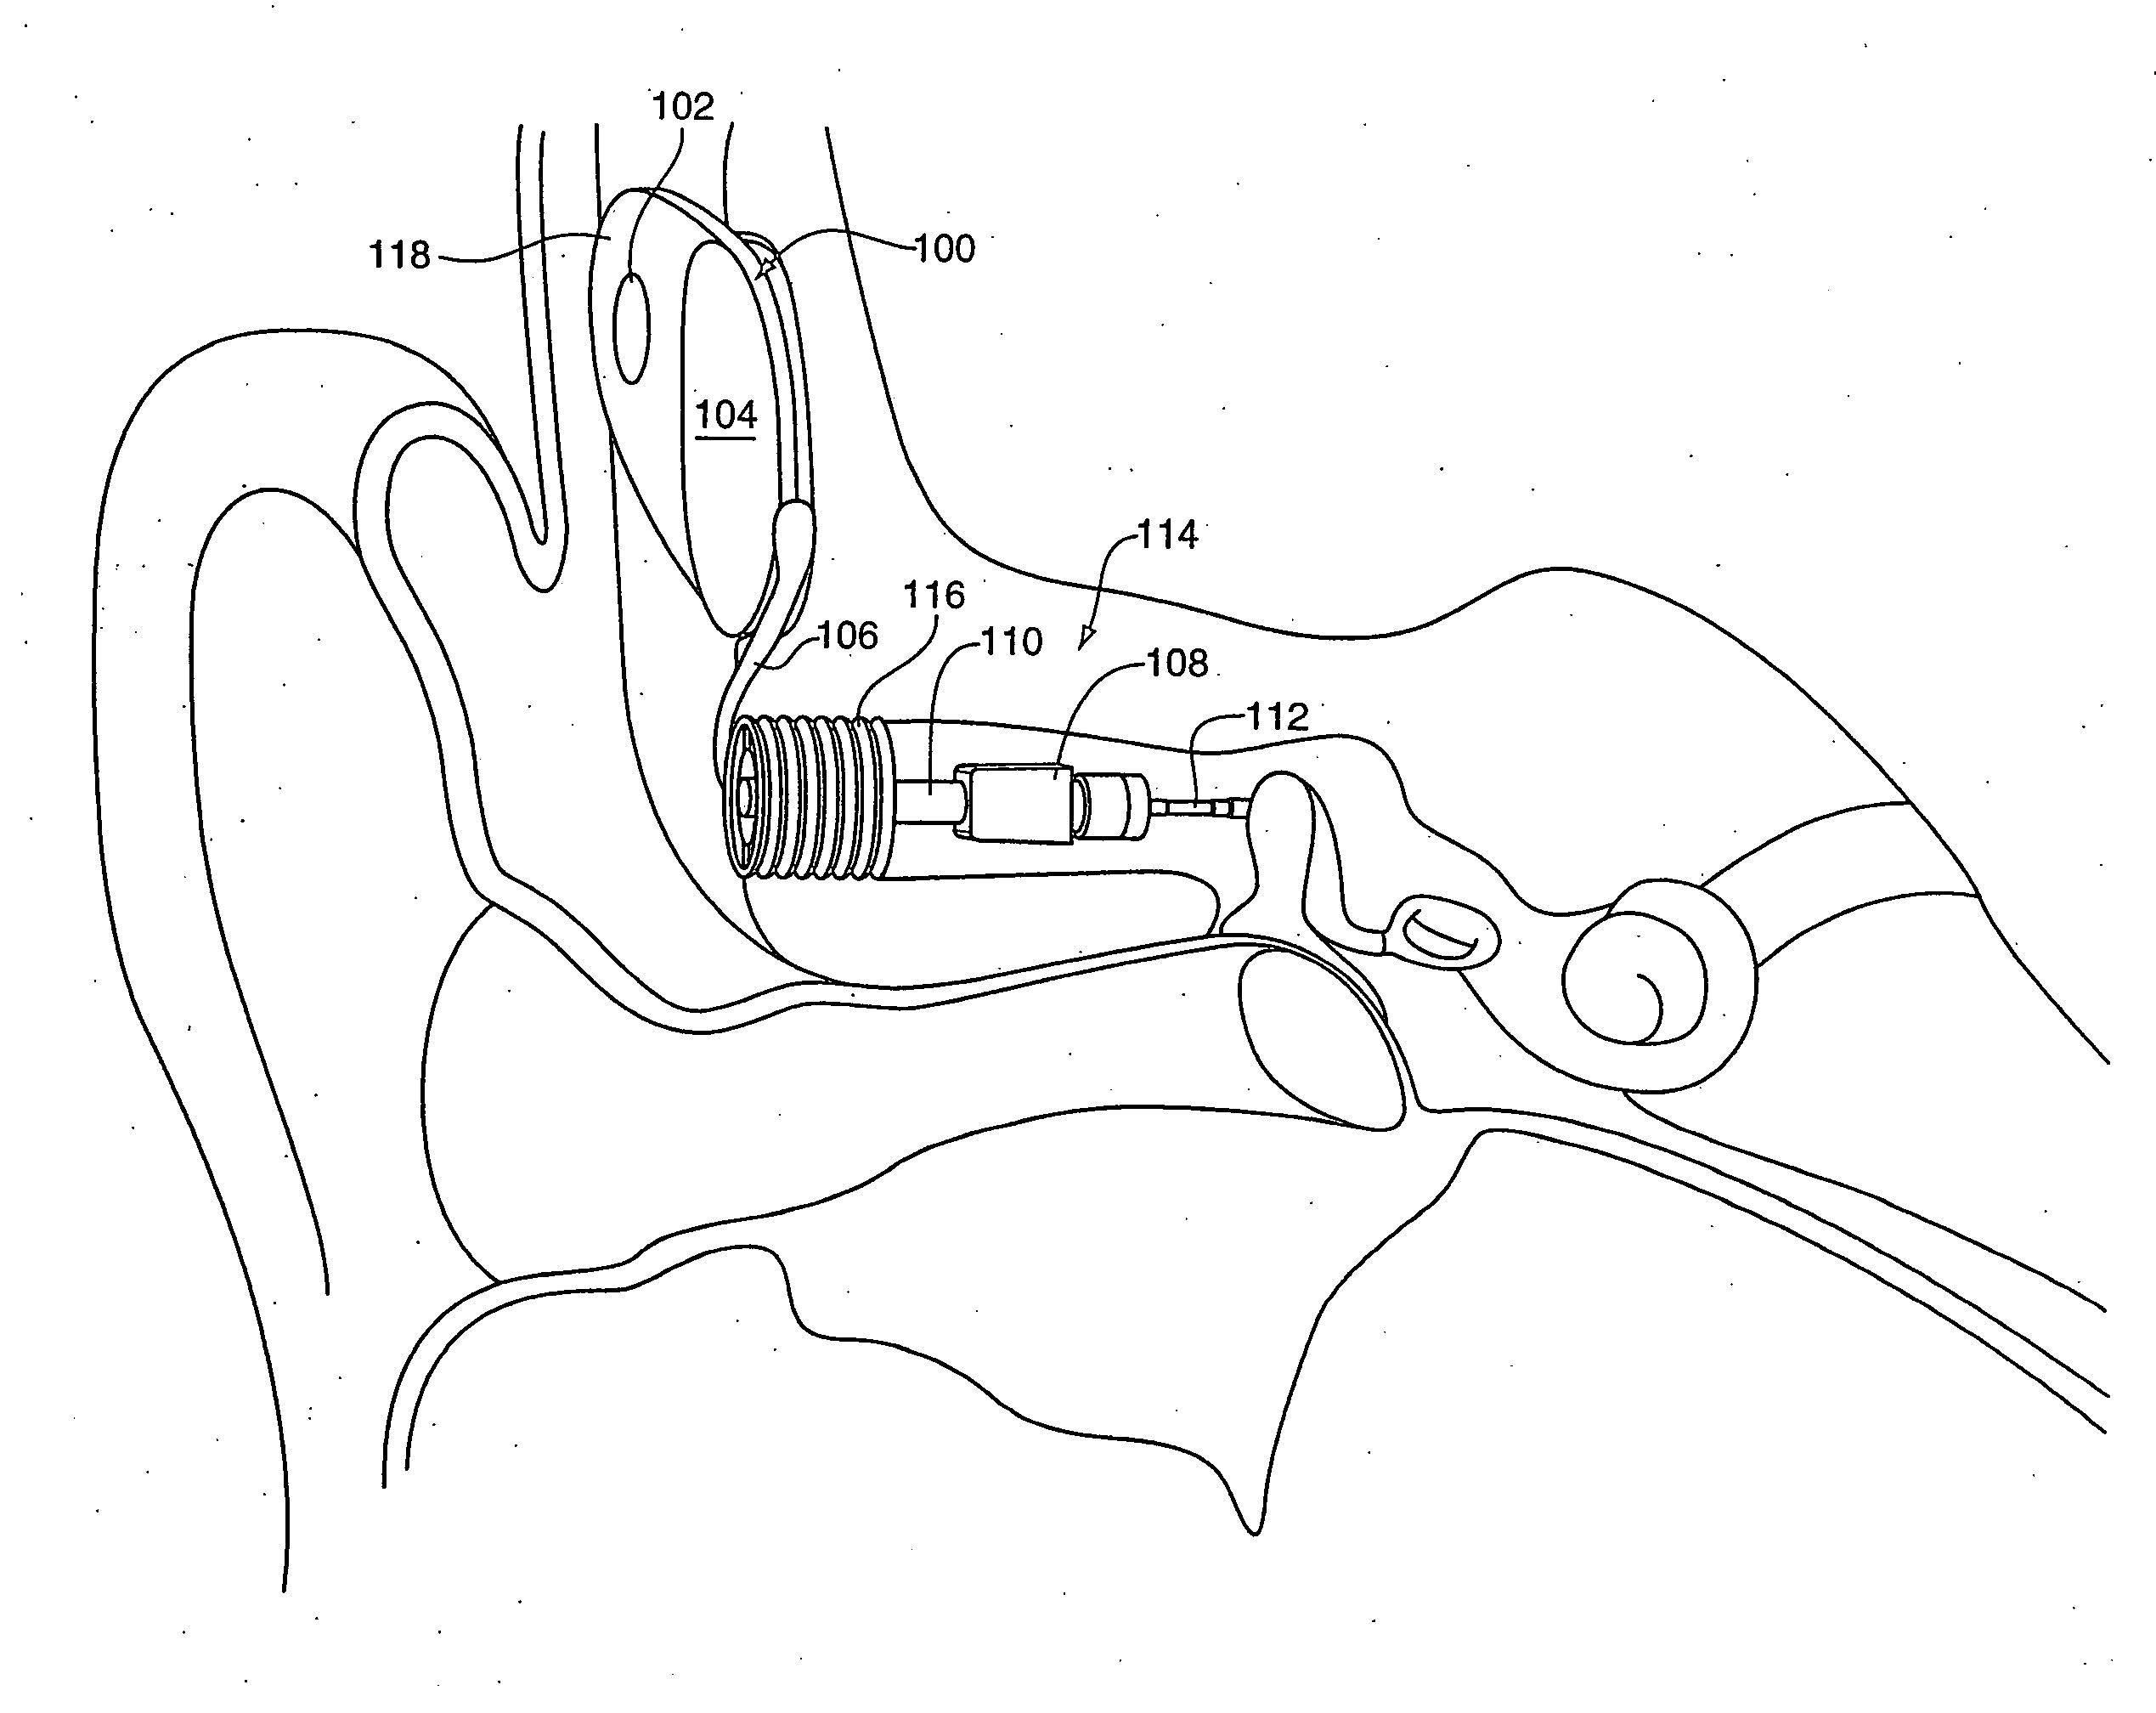 Method and system for external assessment of hearing aids that include implanted actuators